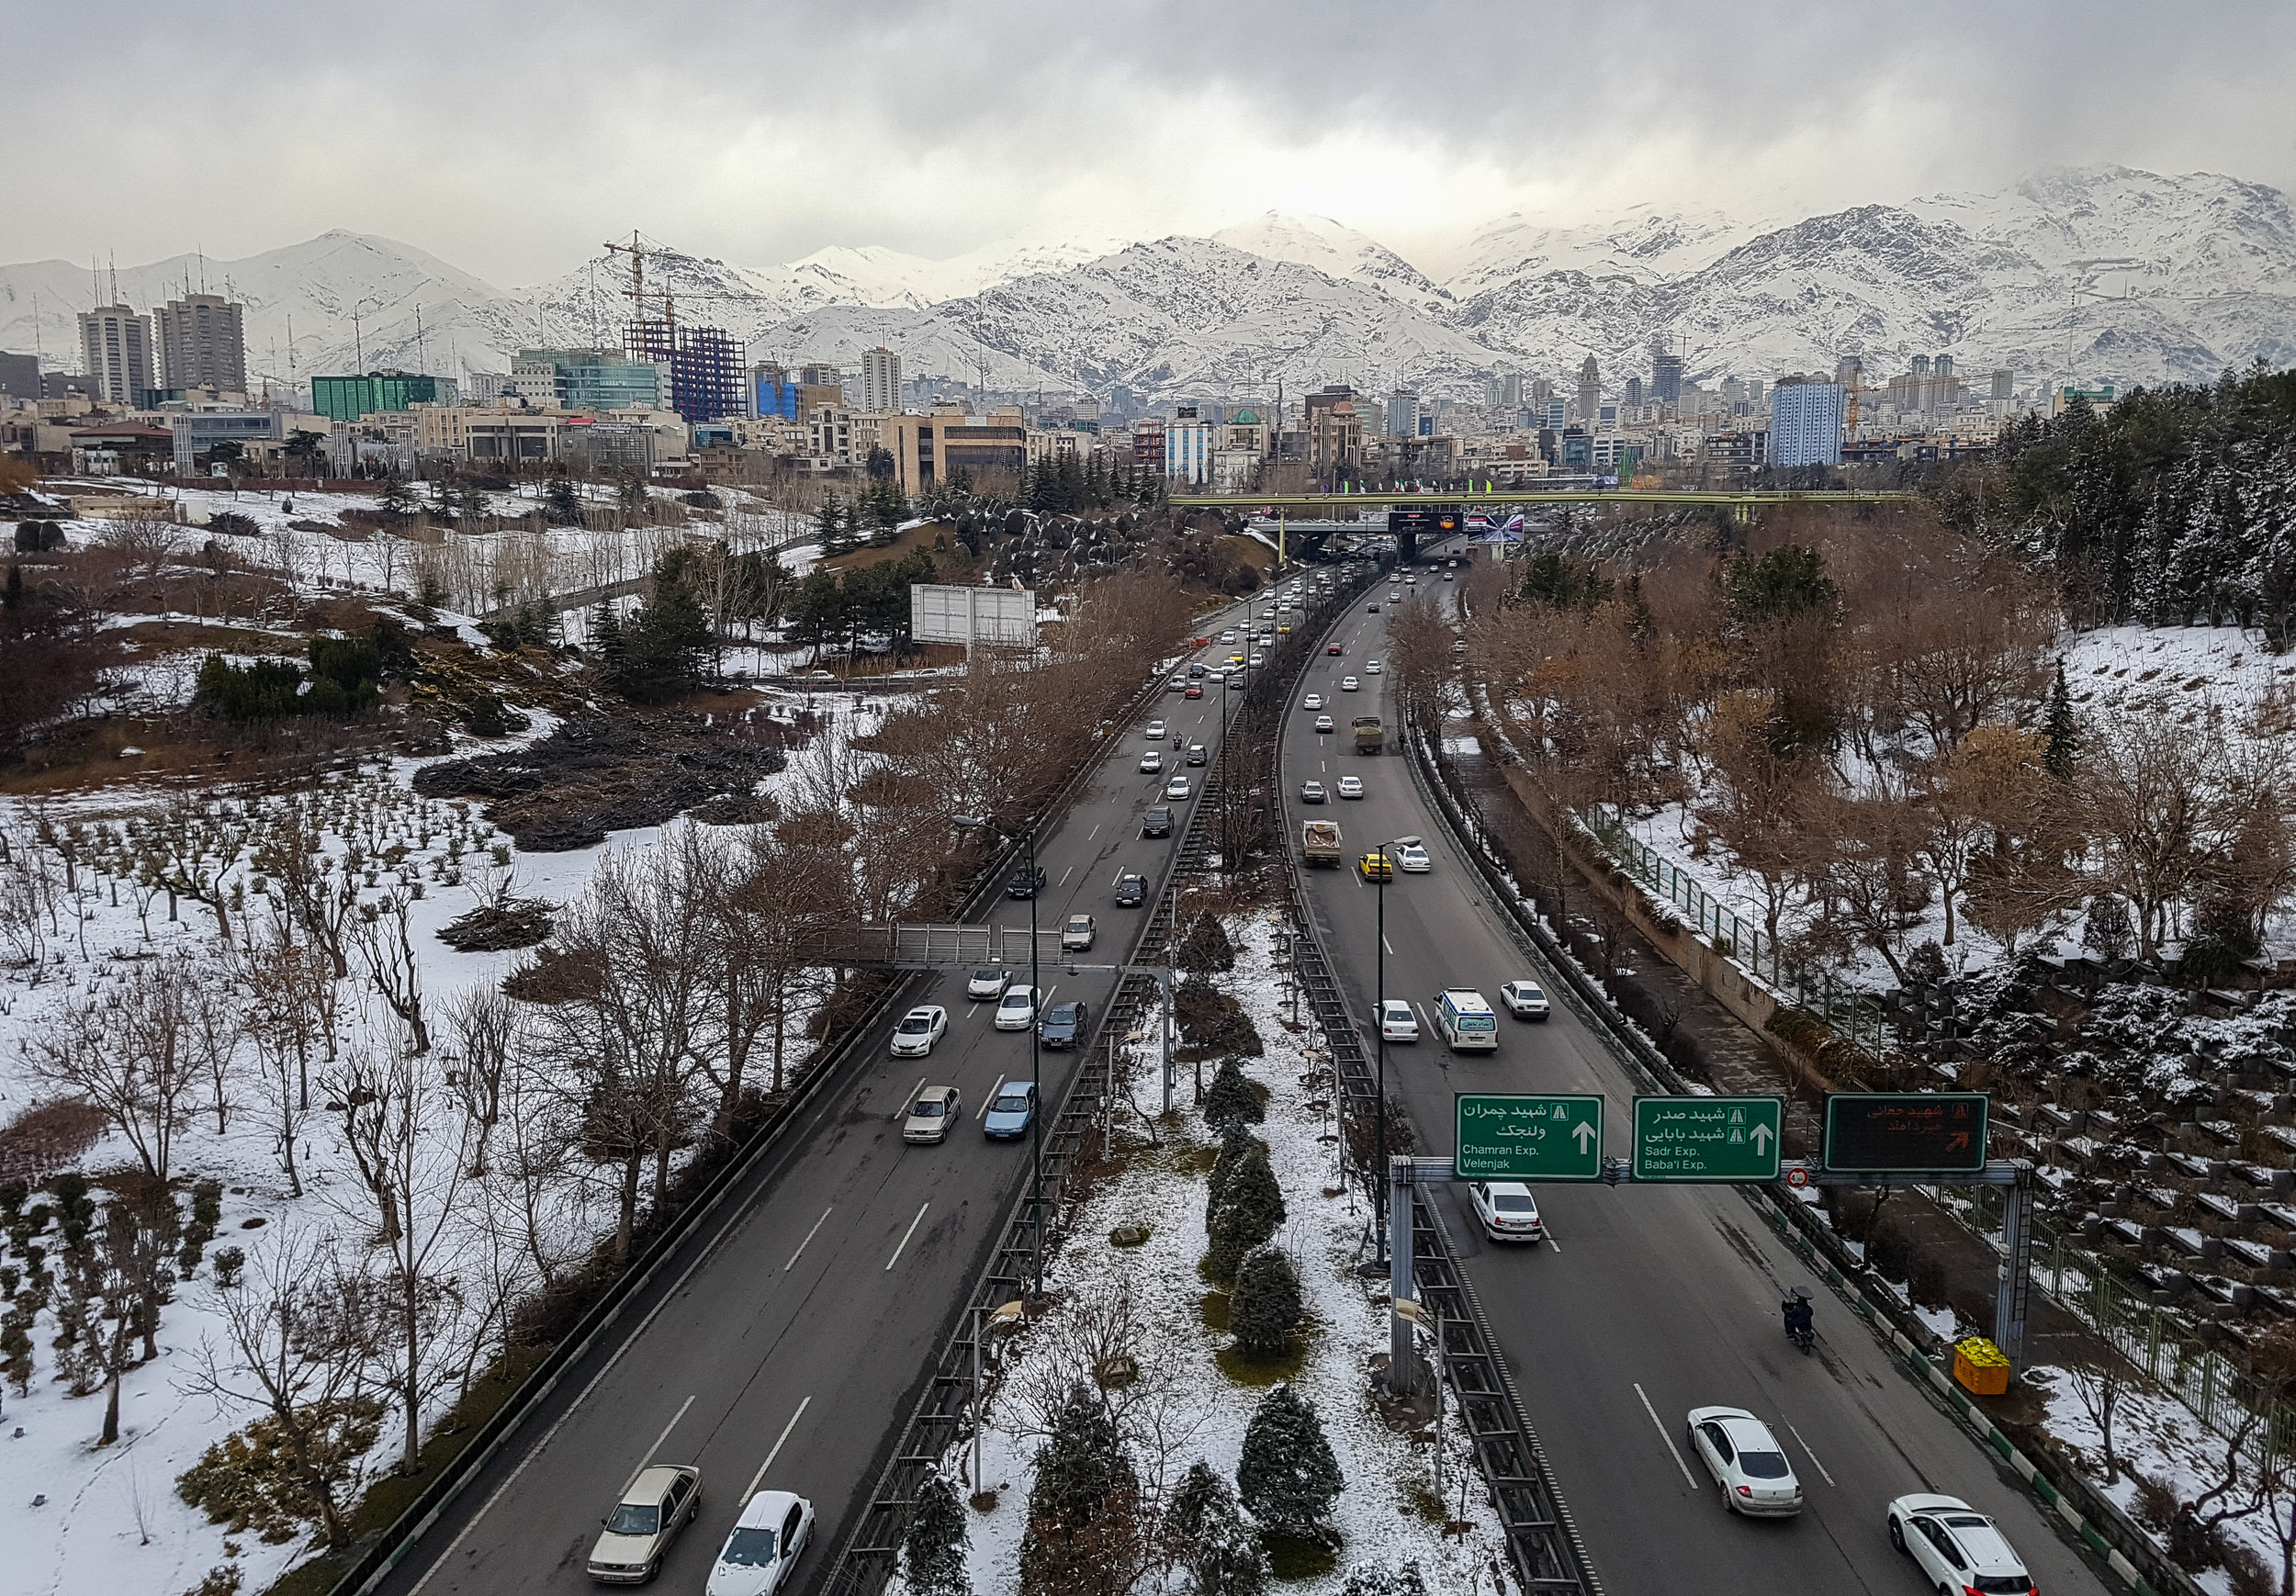 Tehran, the capital and the largest city of Iran